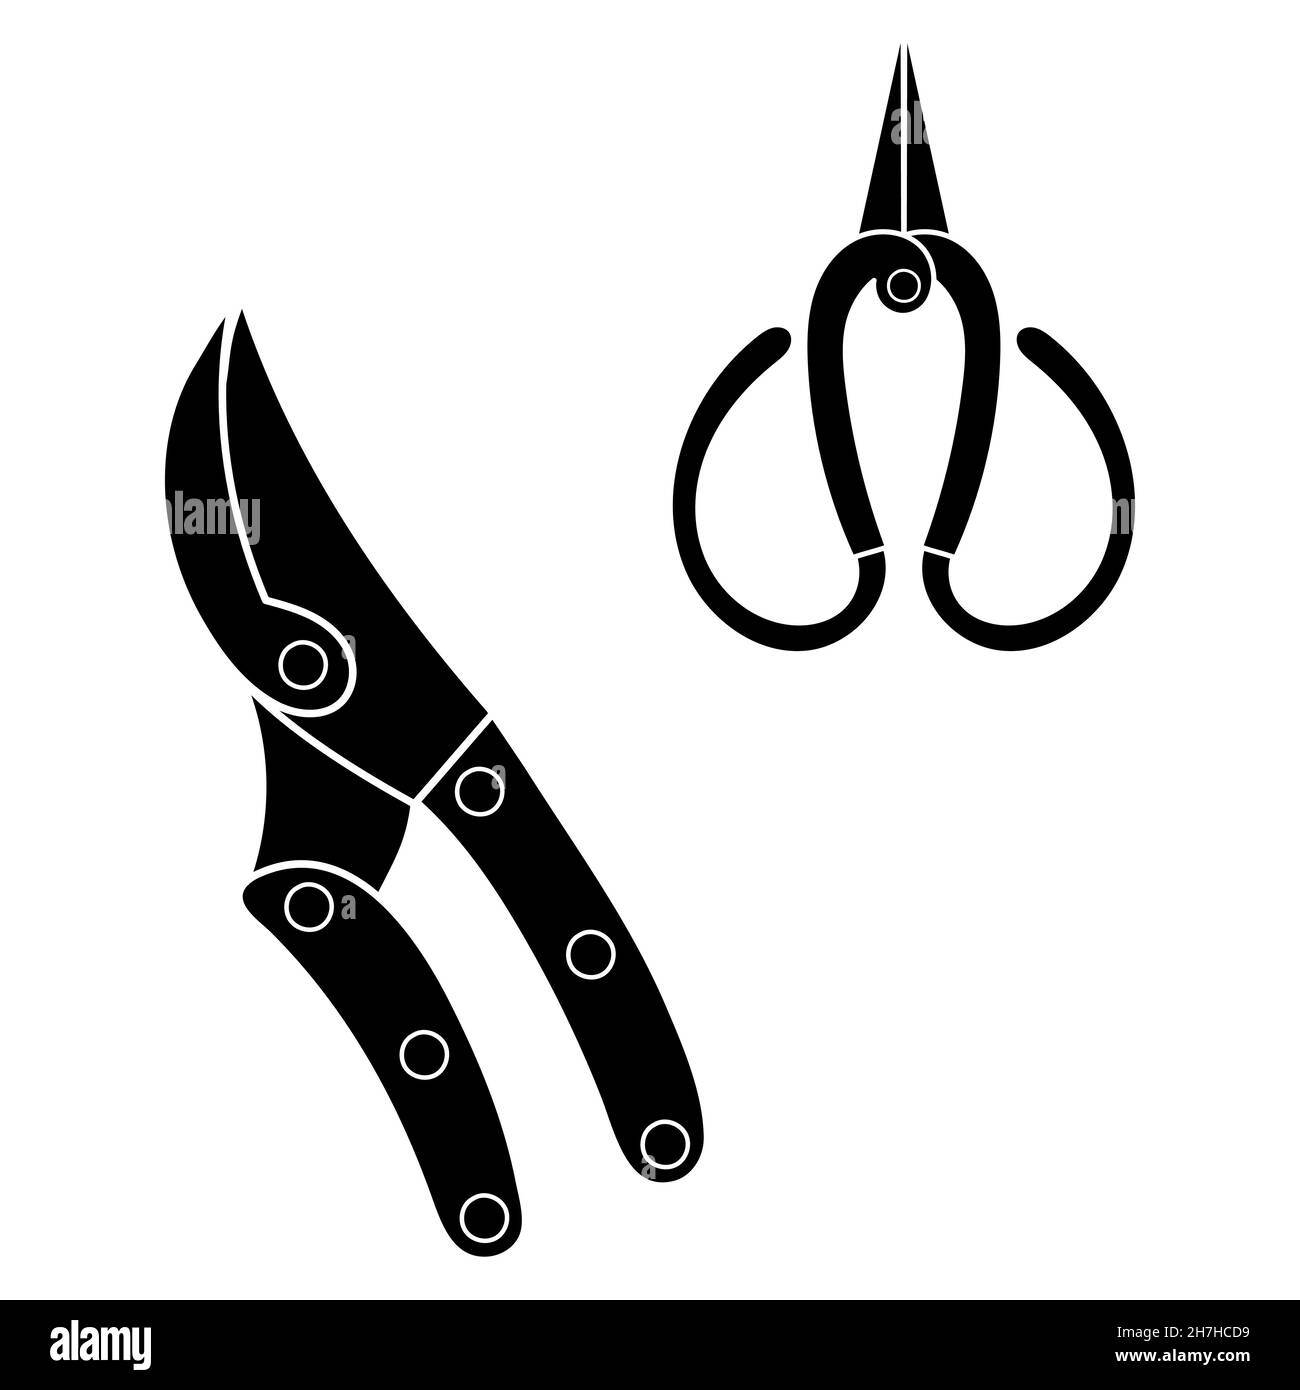 Gardening tools pruners and scissors negative outline simple minimalistic flat design icon vector illustration isolated on white background Stock Vector